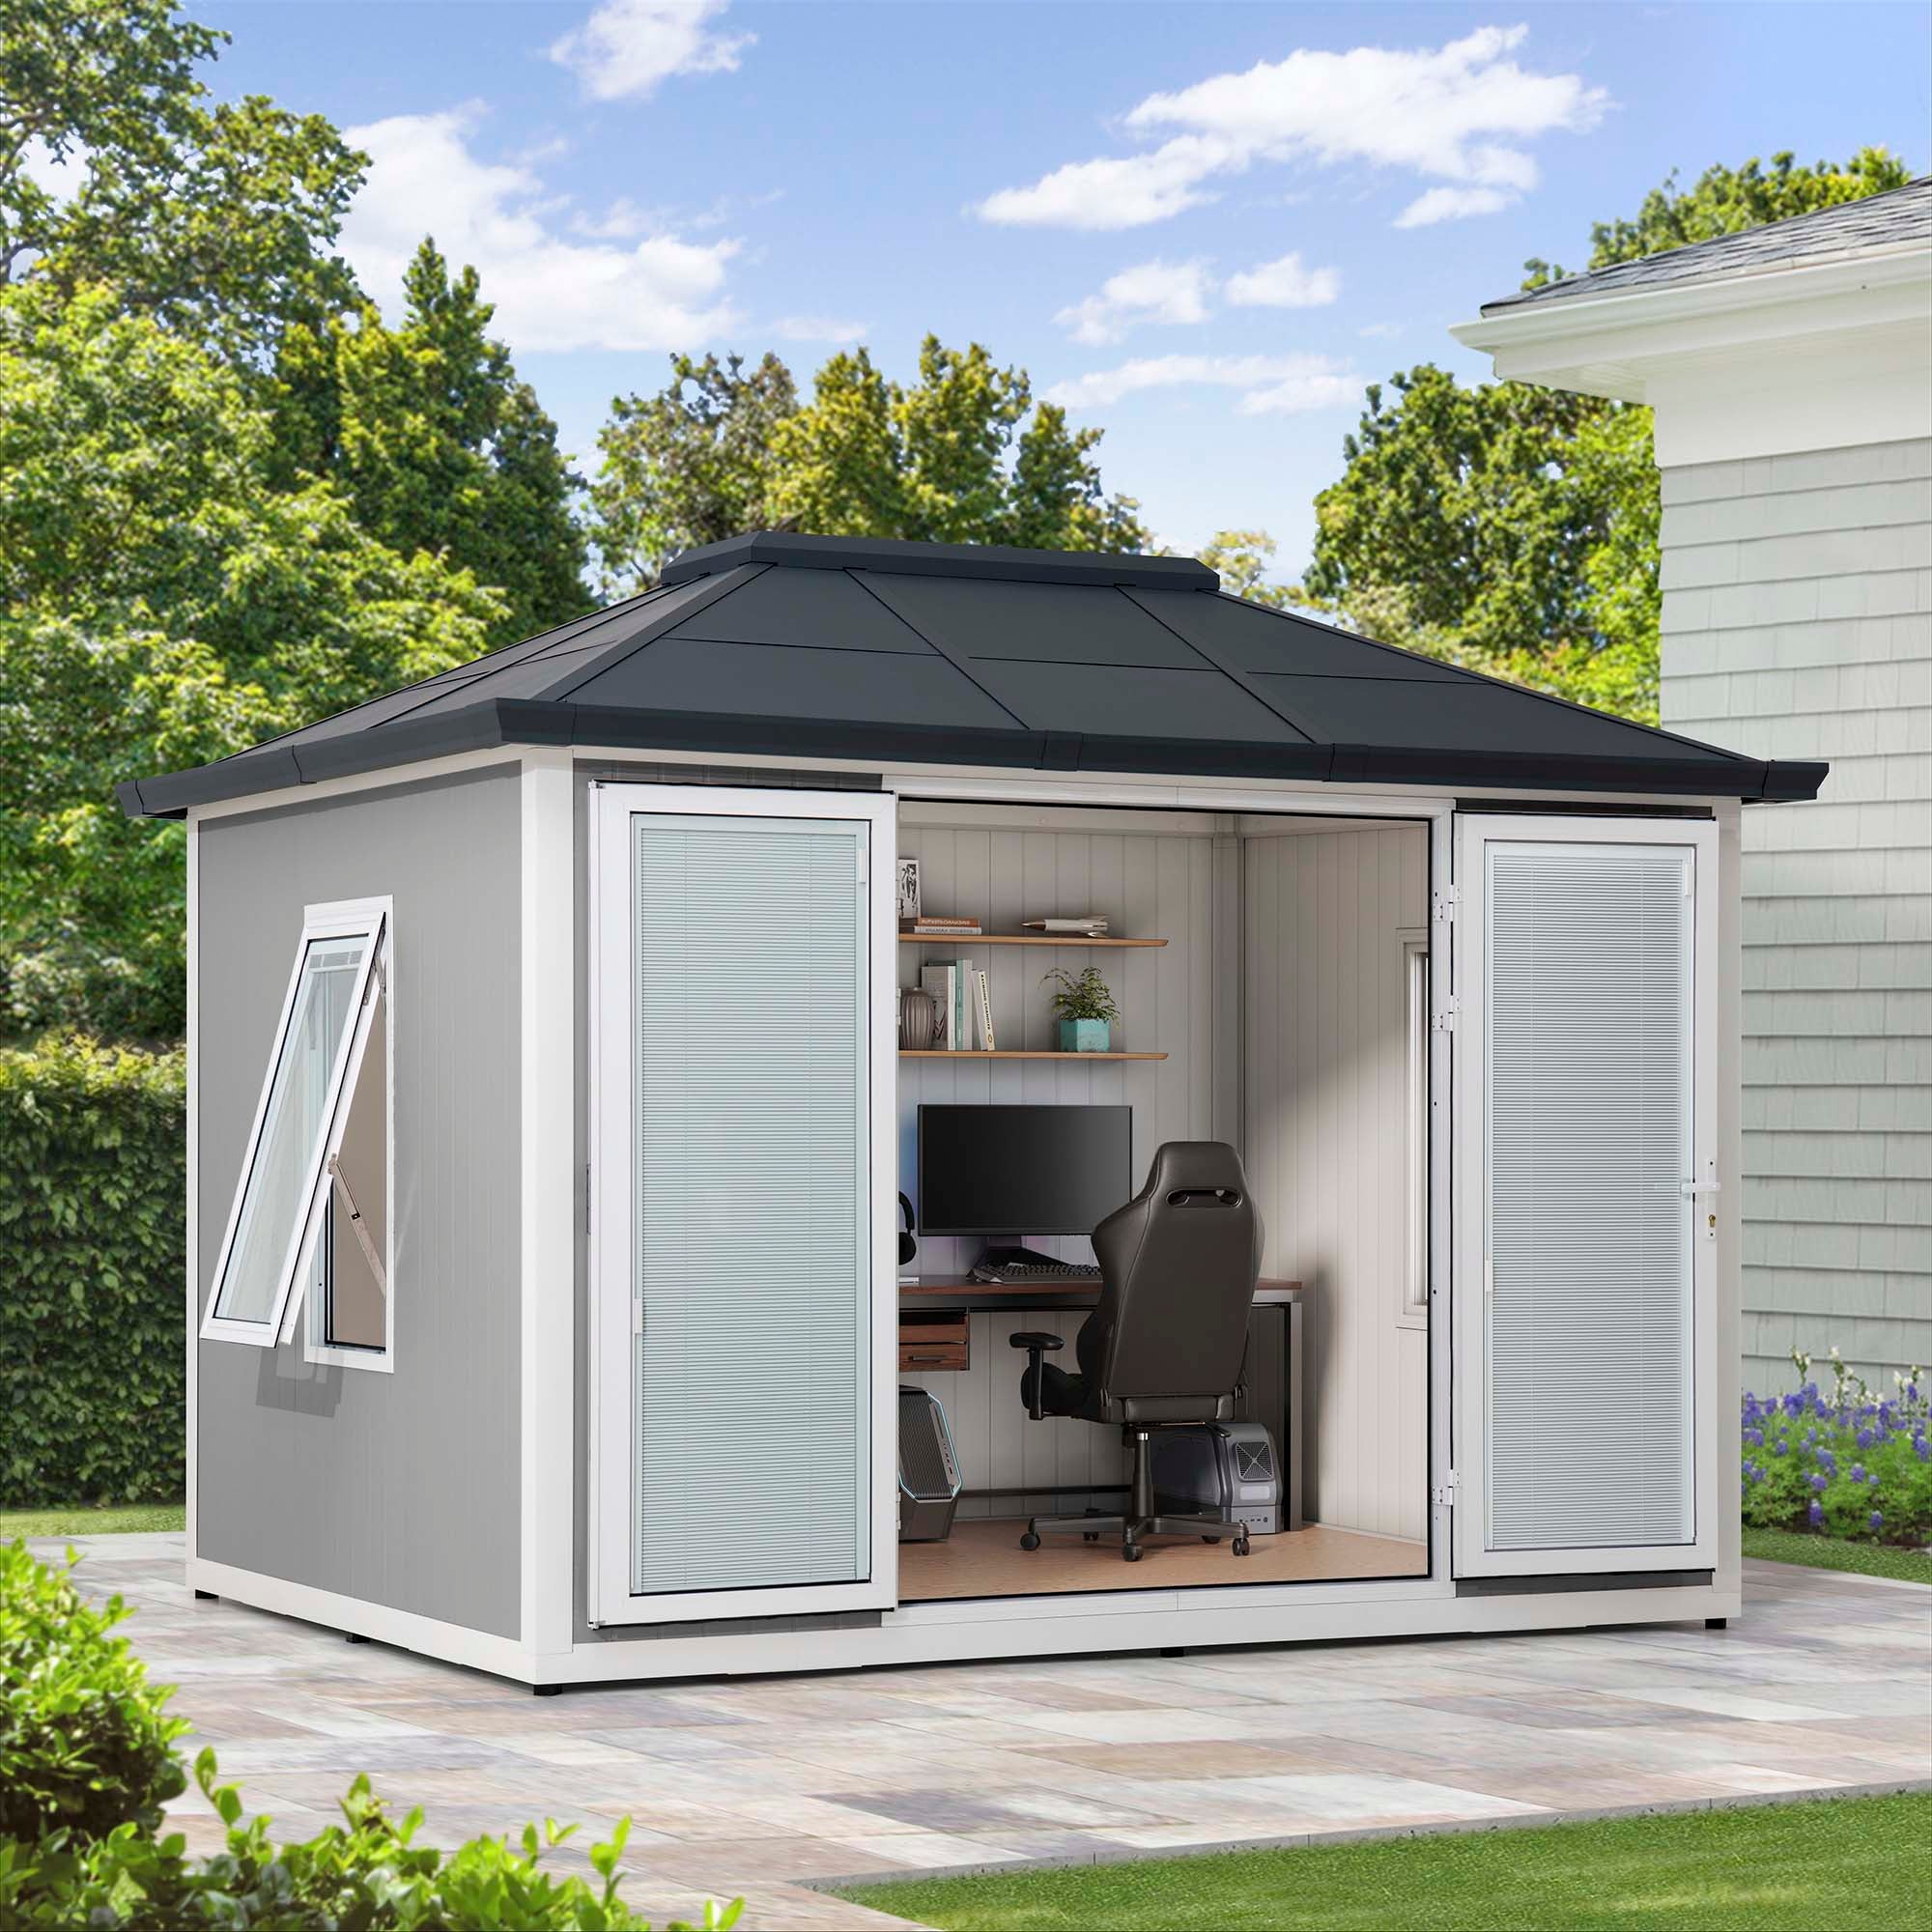 Sunjoy Beyond Shed, 10'x12.6' Backyard Office Shed, Outdoor Storge Shed with Floor, 2 Windows, and Lockable Doors